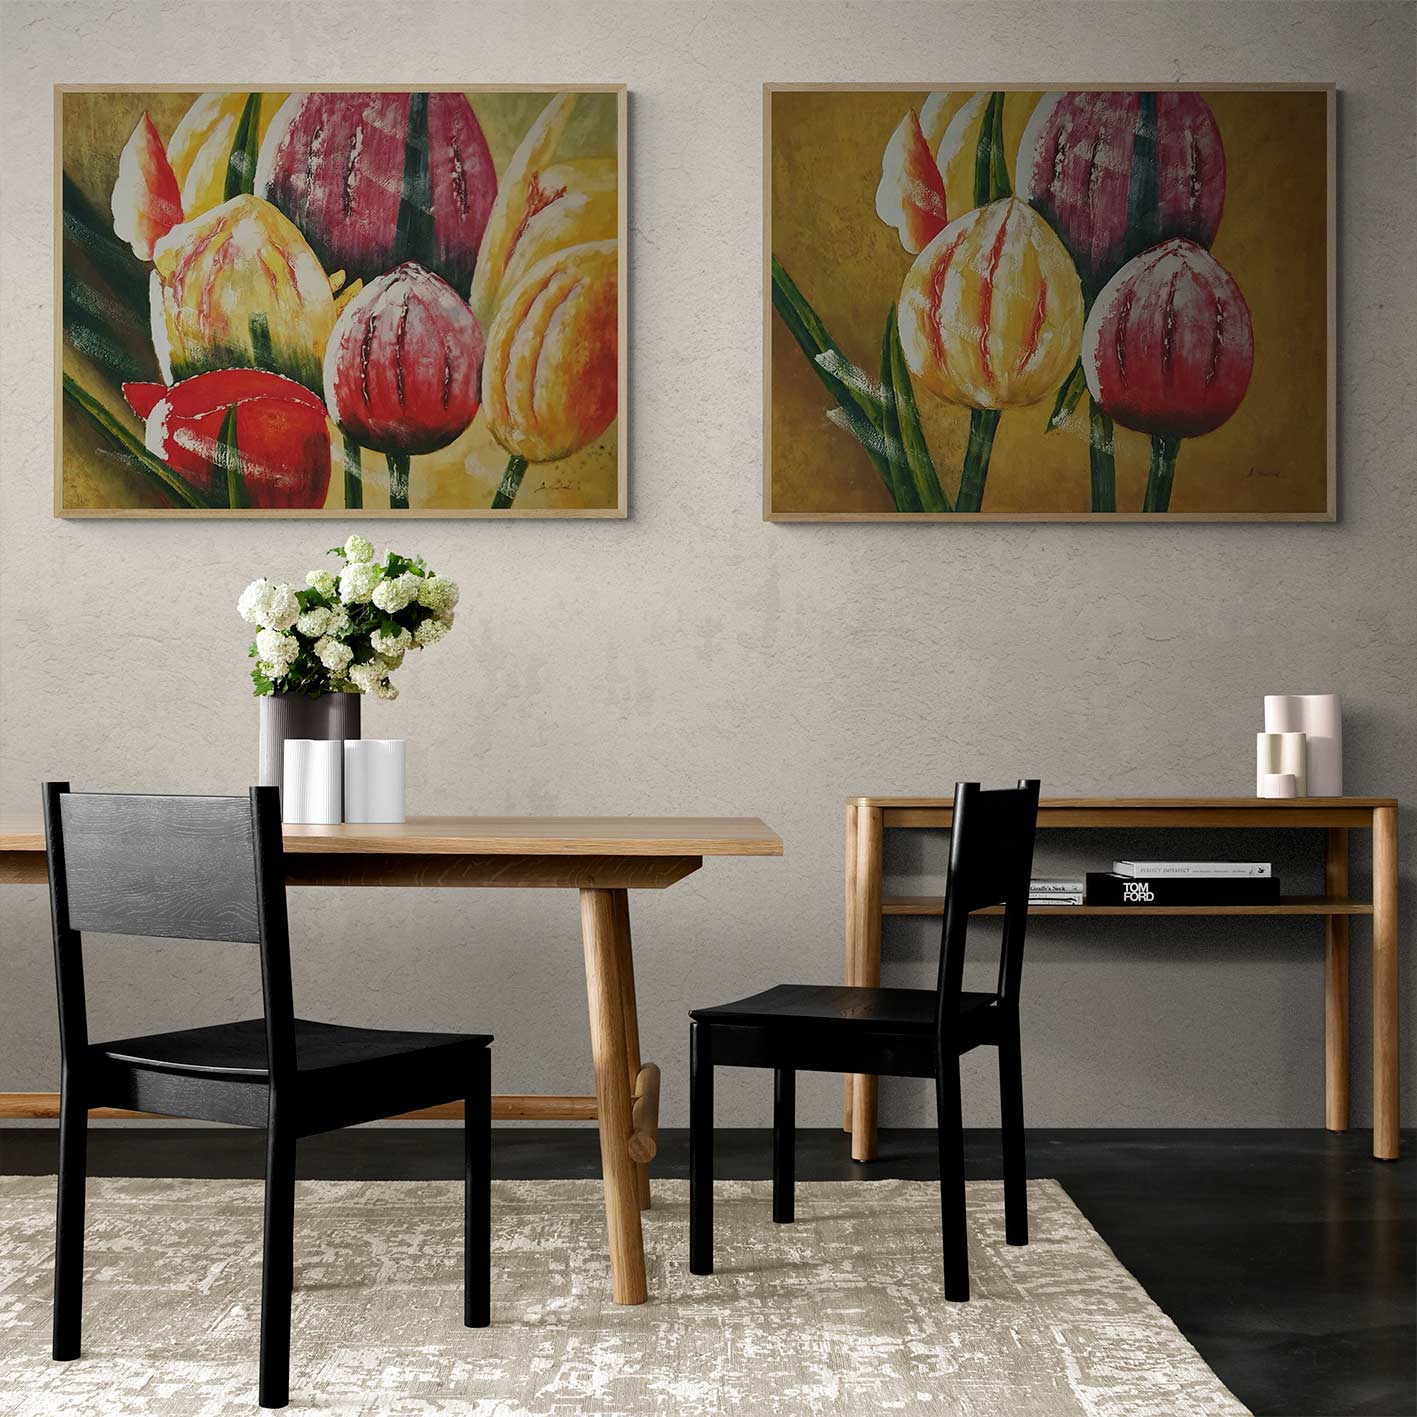 Large Tulips Diptych Painting 120x90 cm [2 pieces]